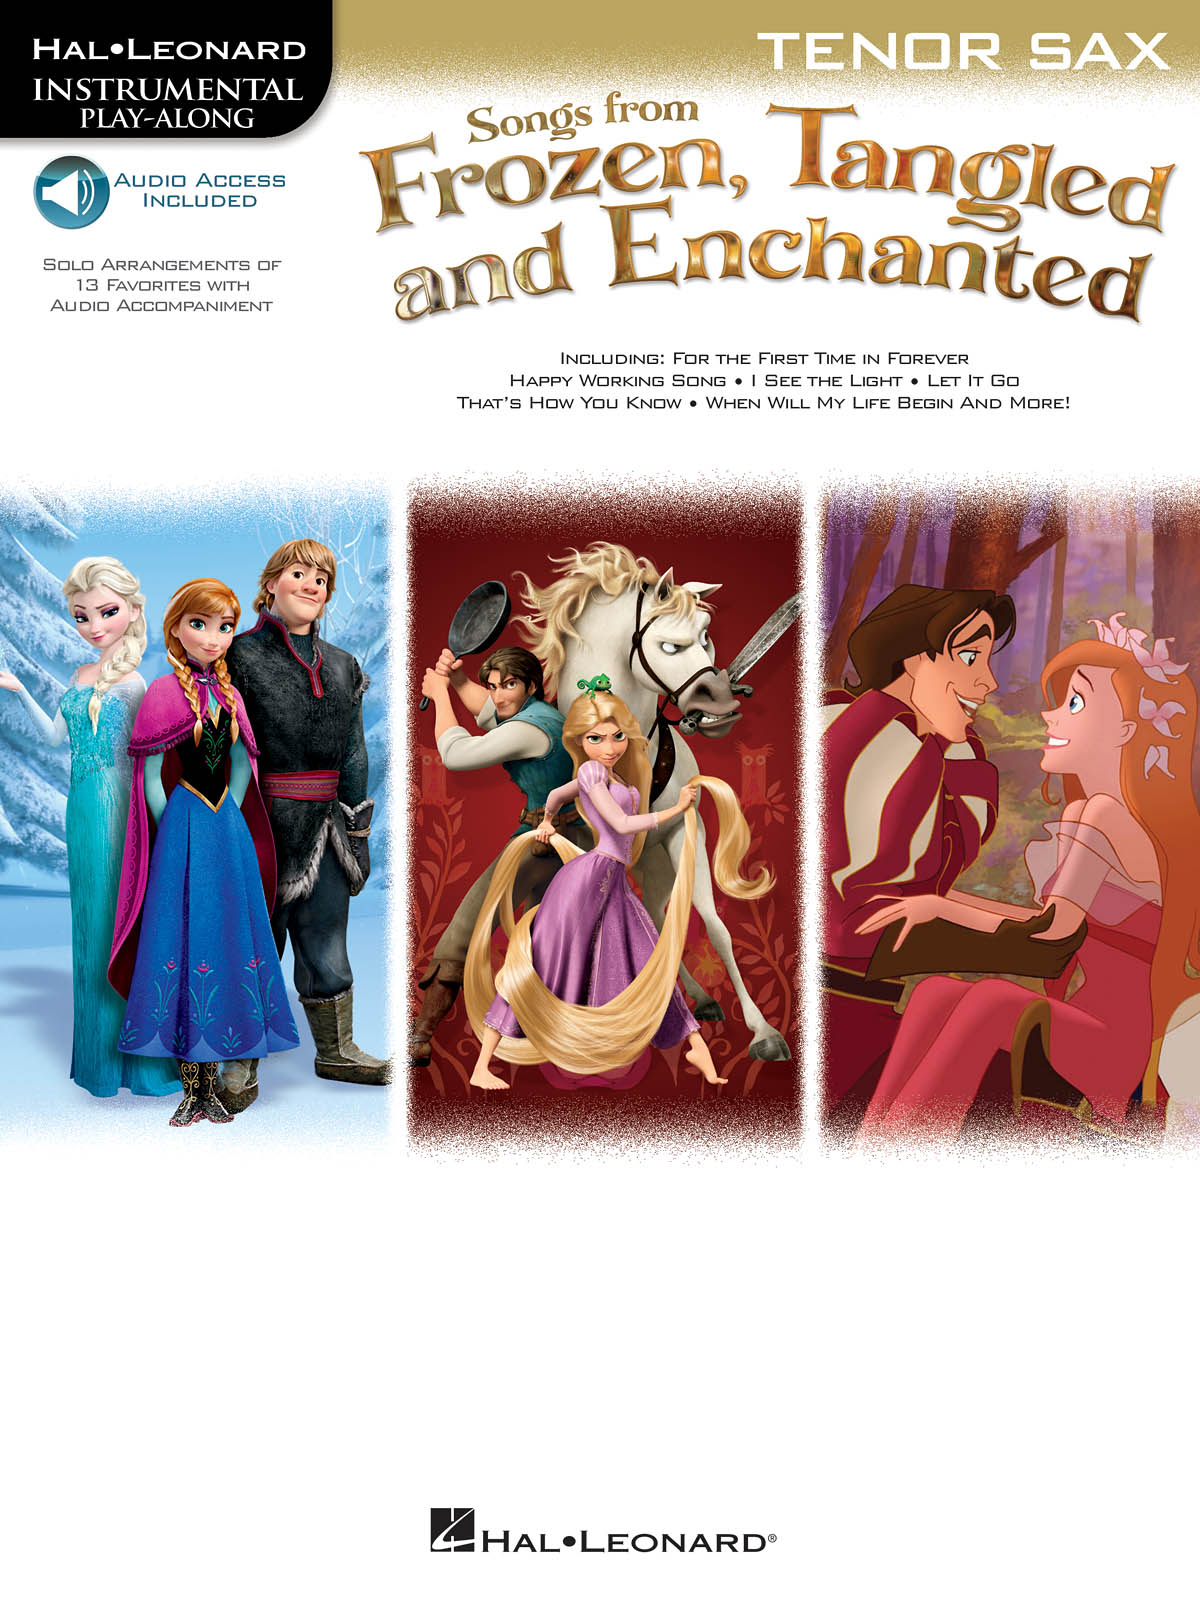 Songs From Frozen, Tangled & Enchanted - Tenor Sax - Instrumental Play-Along